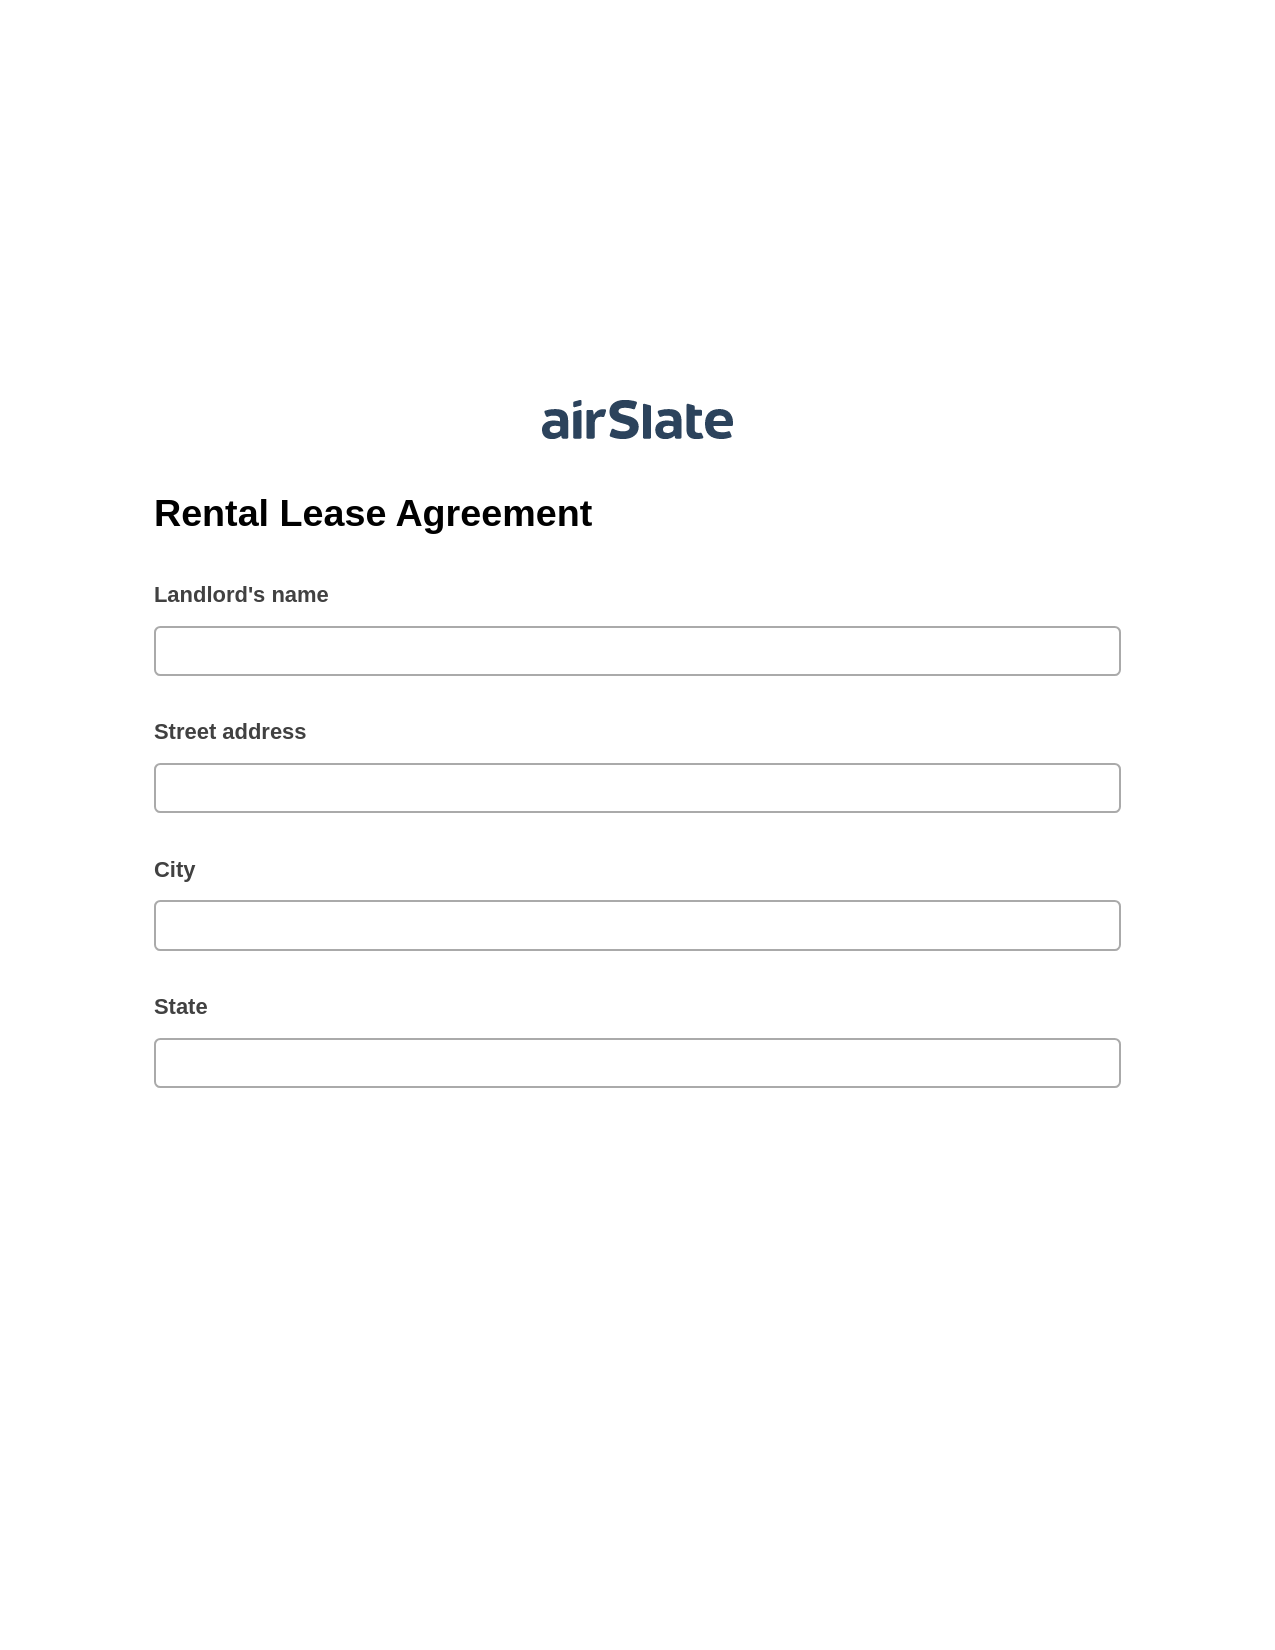 Rental Lease Agreement Pre-fill from Salesforce Records with SOQL Bot, Create slate bot, Export to NetSuite Record Bot